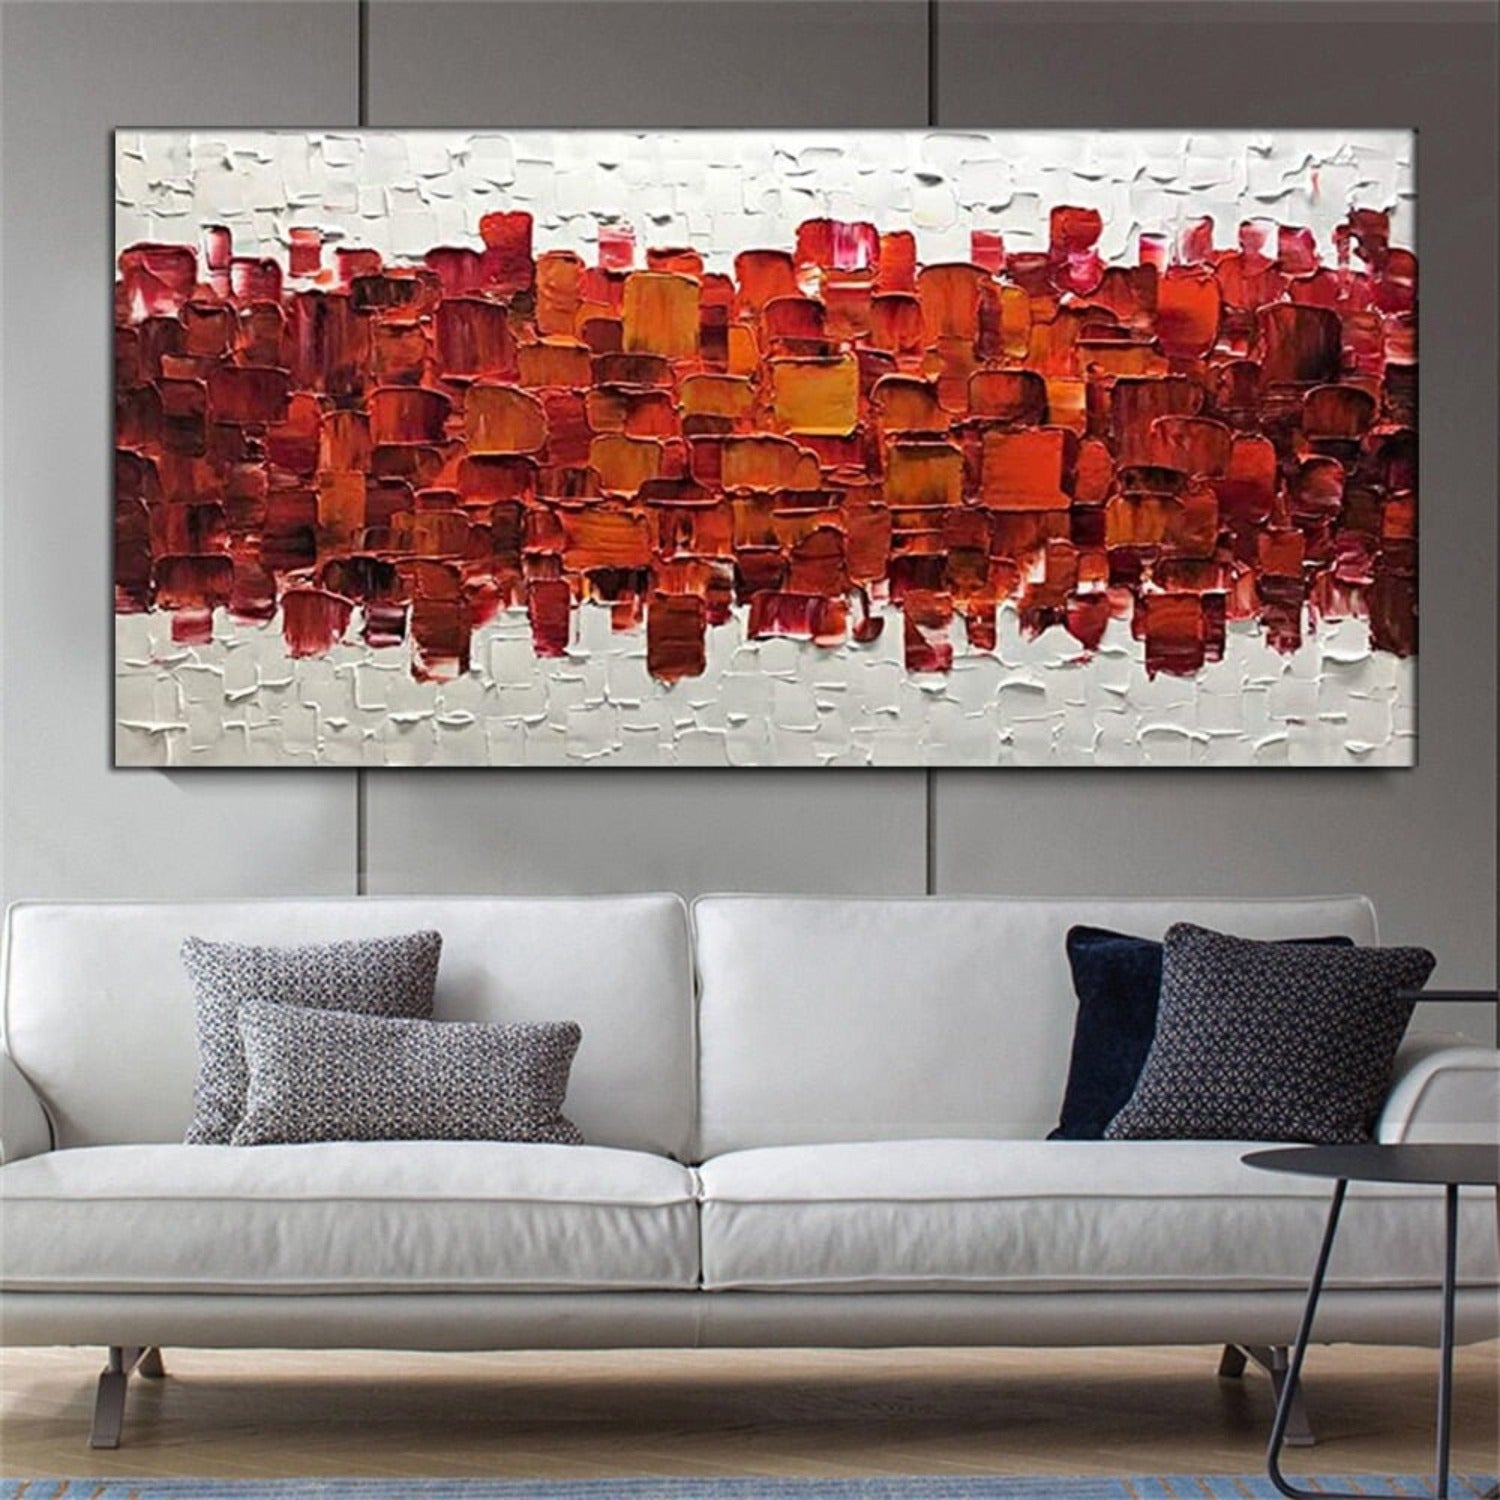 3D Red Texture 100% Hand Painted Palette Knife Art